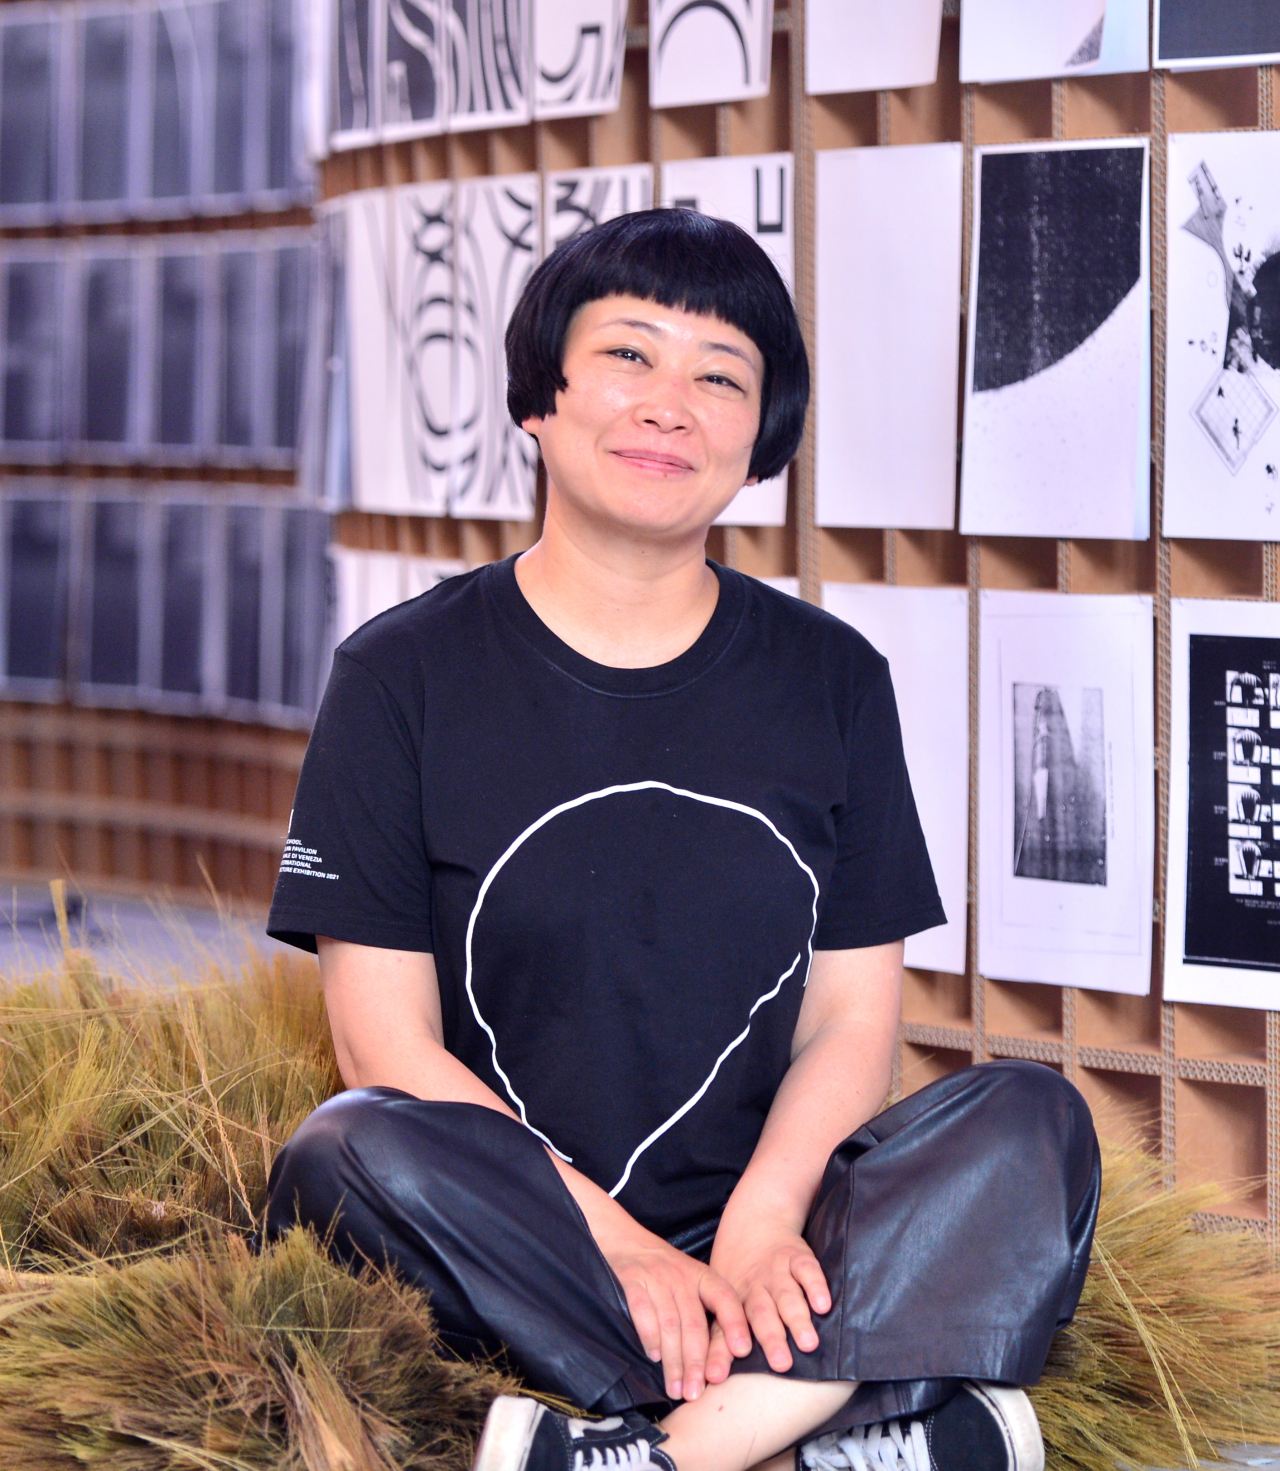 Shin Hae-won, curator of the Korean Pavilion at the 2021 Venice Architecture Biennale, poses for a photo at the Arko Art Center in Seoul, Thursday. (Park Hyun-koo/The Korea Herald)